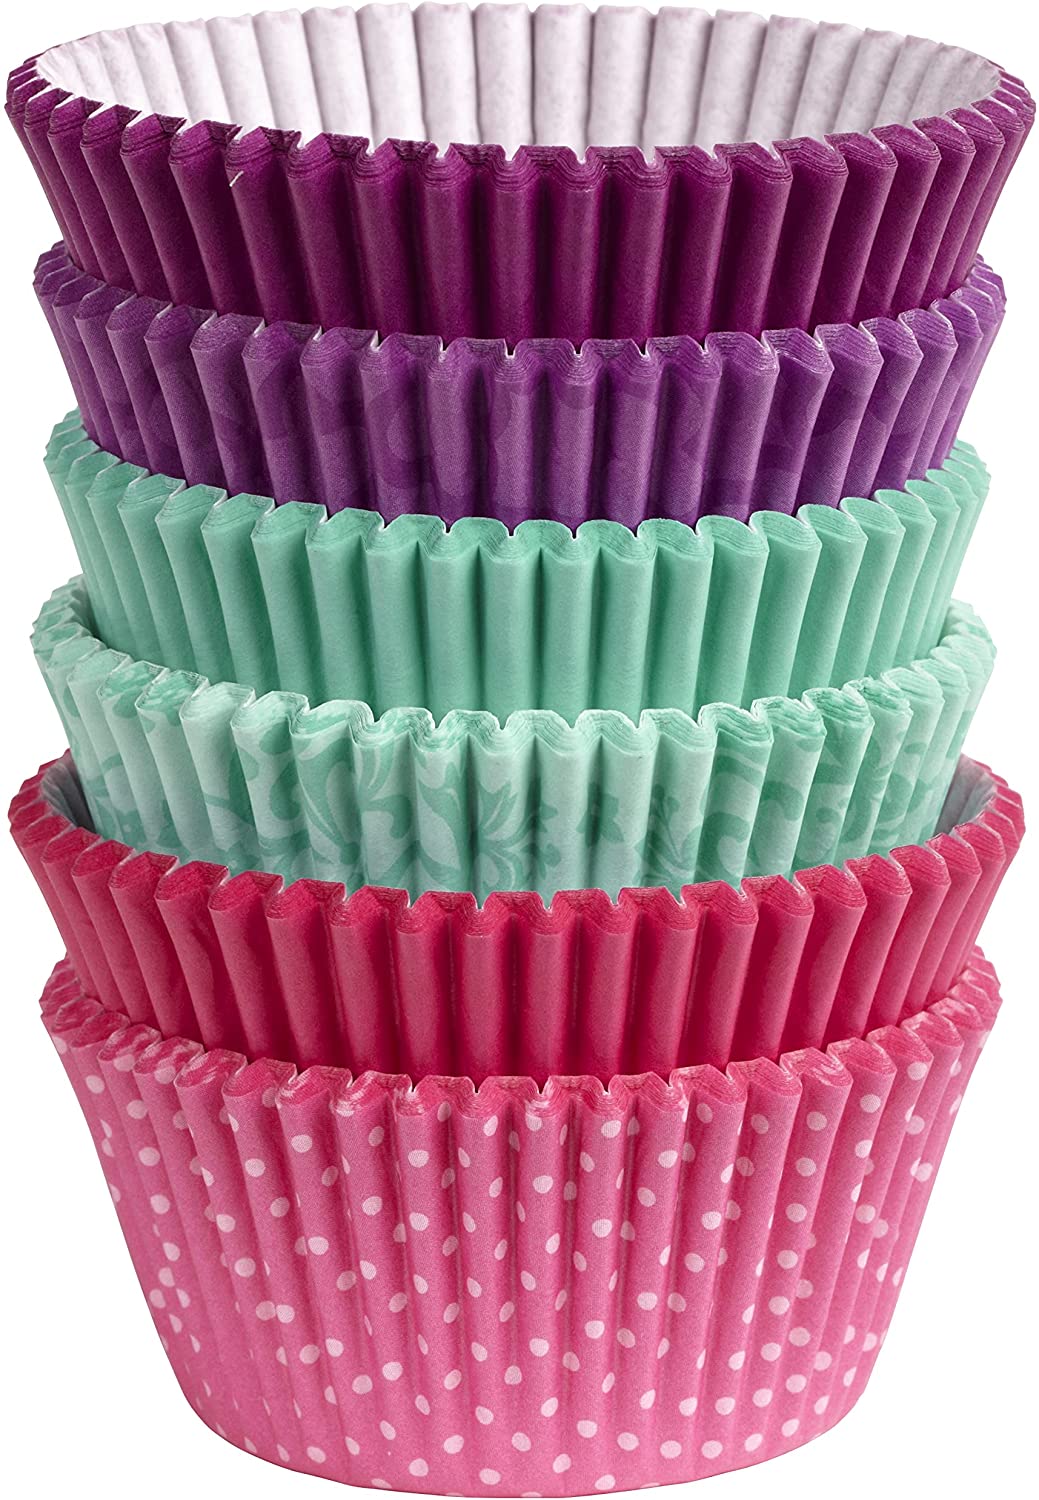 Wilton Standard Baking Cups, Pack of 150, Multi-Colour